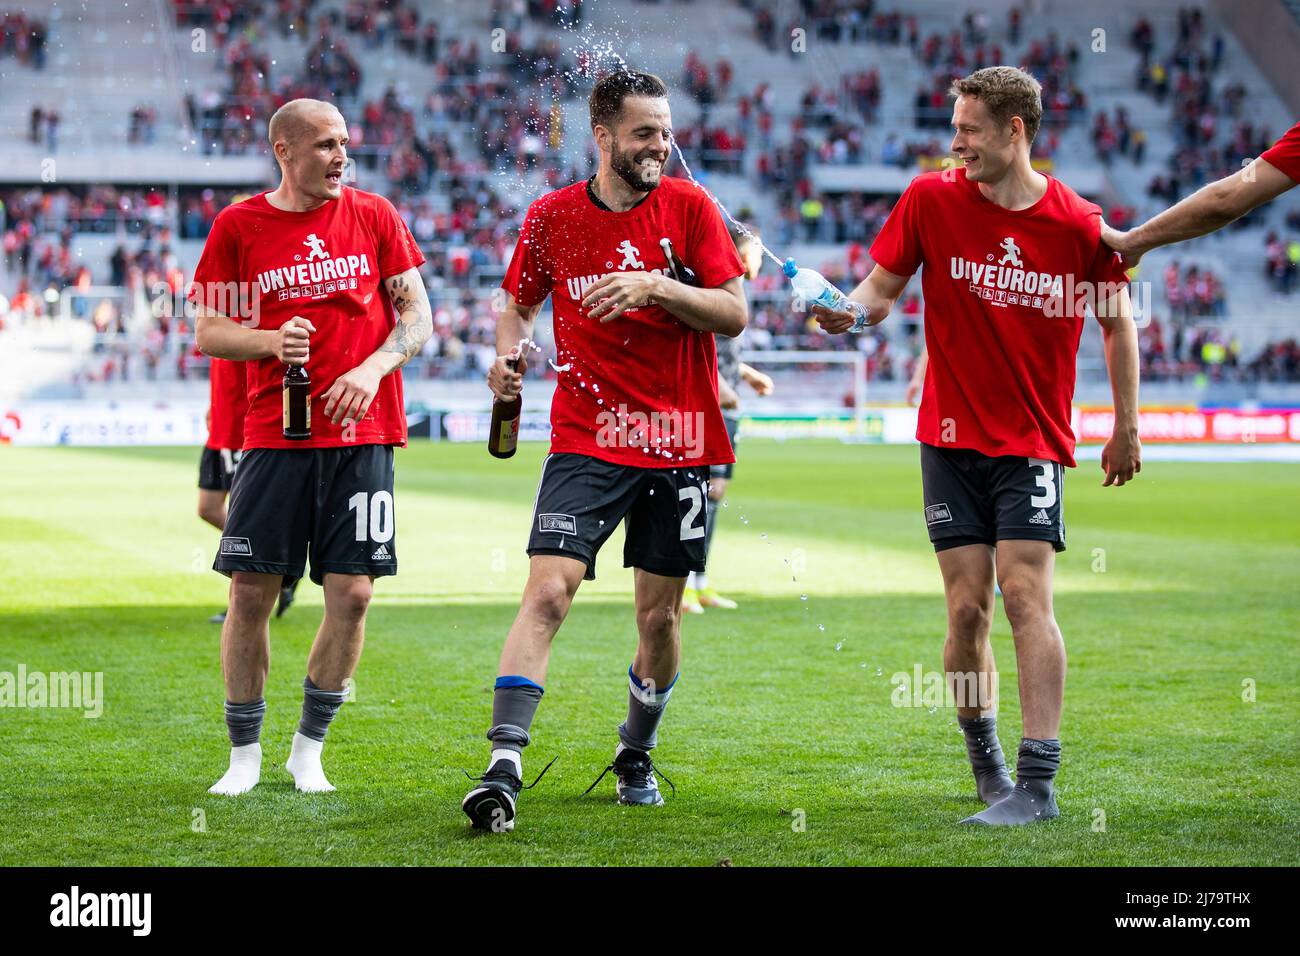 07 May 2022, Baden-Wuerttemberg, Freiburg im Breisgau: Soccer: Bundesliga, SC Freiburg - 1. FC Union Berlin, 33. matchday, Europa-Park Stadion. Union Berlin's Sven Michel (l-r), Union Berlin's Niko Gießelmann and Union Berlin's Paul Jaeckel celebrate with the fans after the match. Photo: Tom Weller/dpa - IMPORTANT NOTE: In accordance with the requirements of the DFL Deutsche Fußball Liga and the DFB Deutscher Fußball-Bund, it is prohibited to use or have used photographs taken in the stadium and/or of the match in the form of sequence pictures and/or video-like photo series. Stock Photo